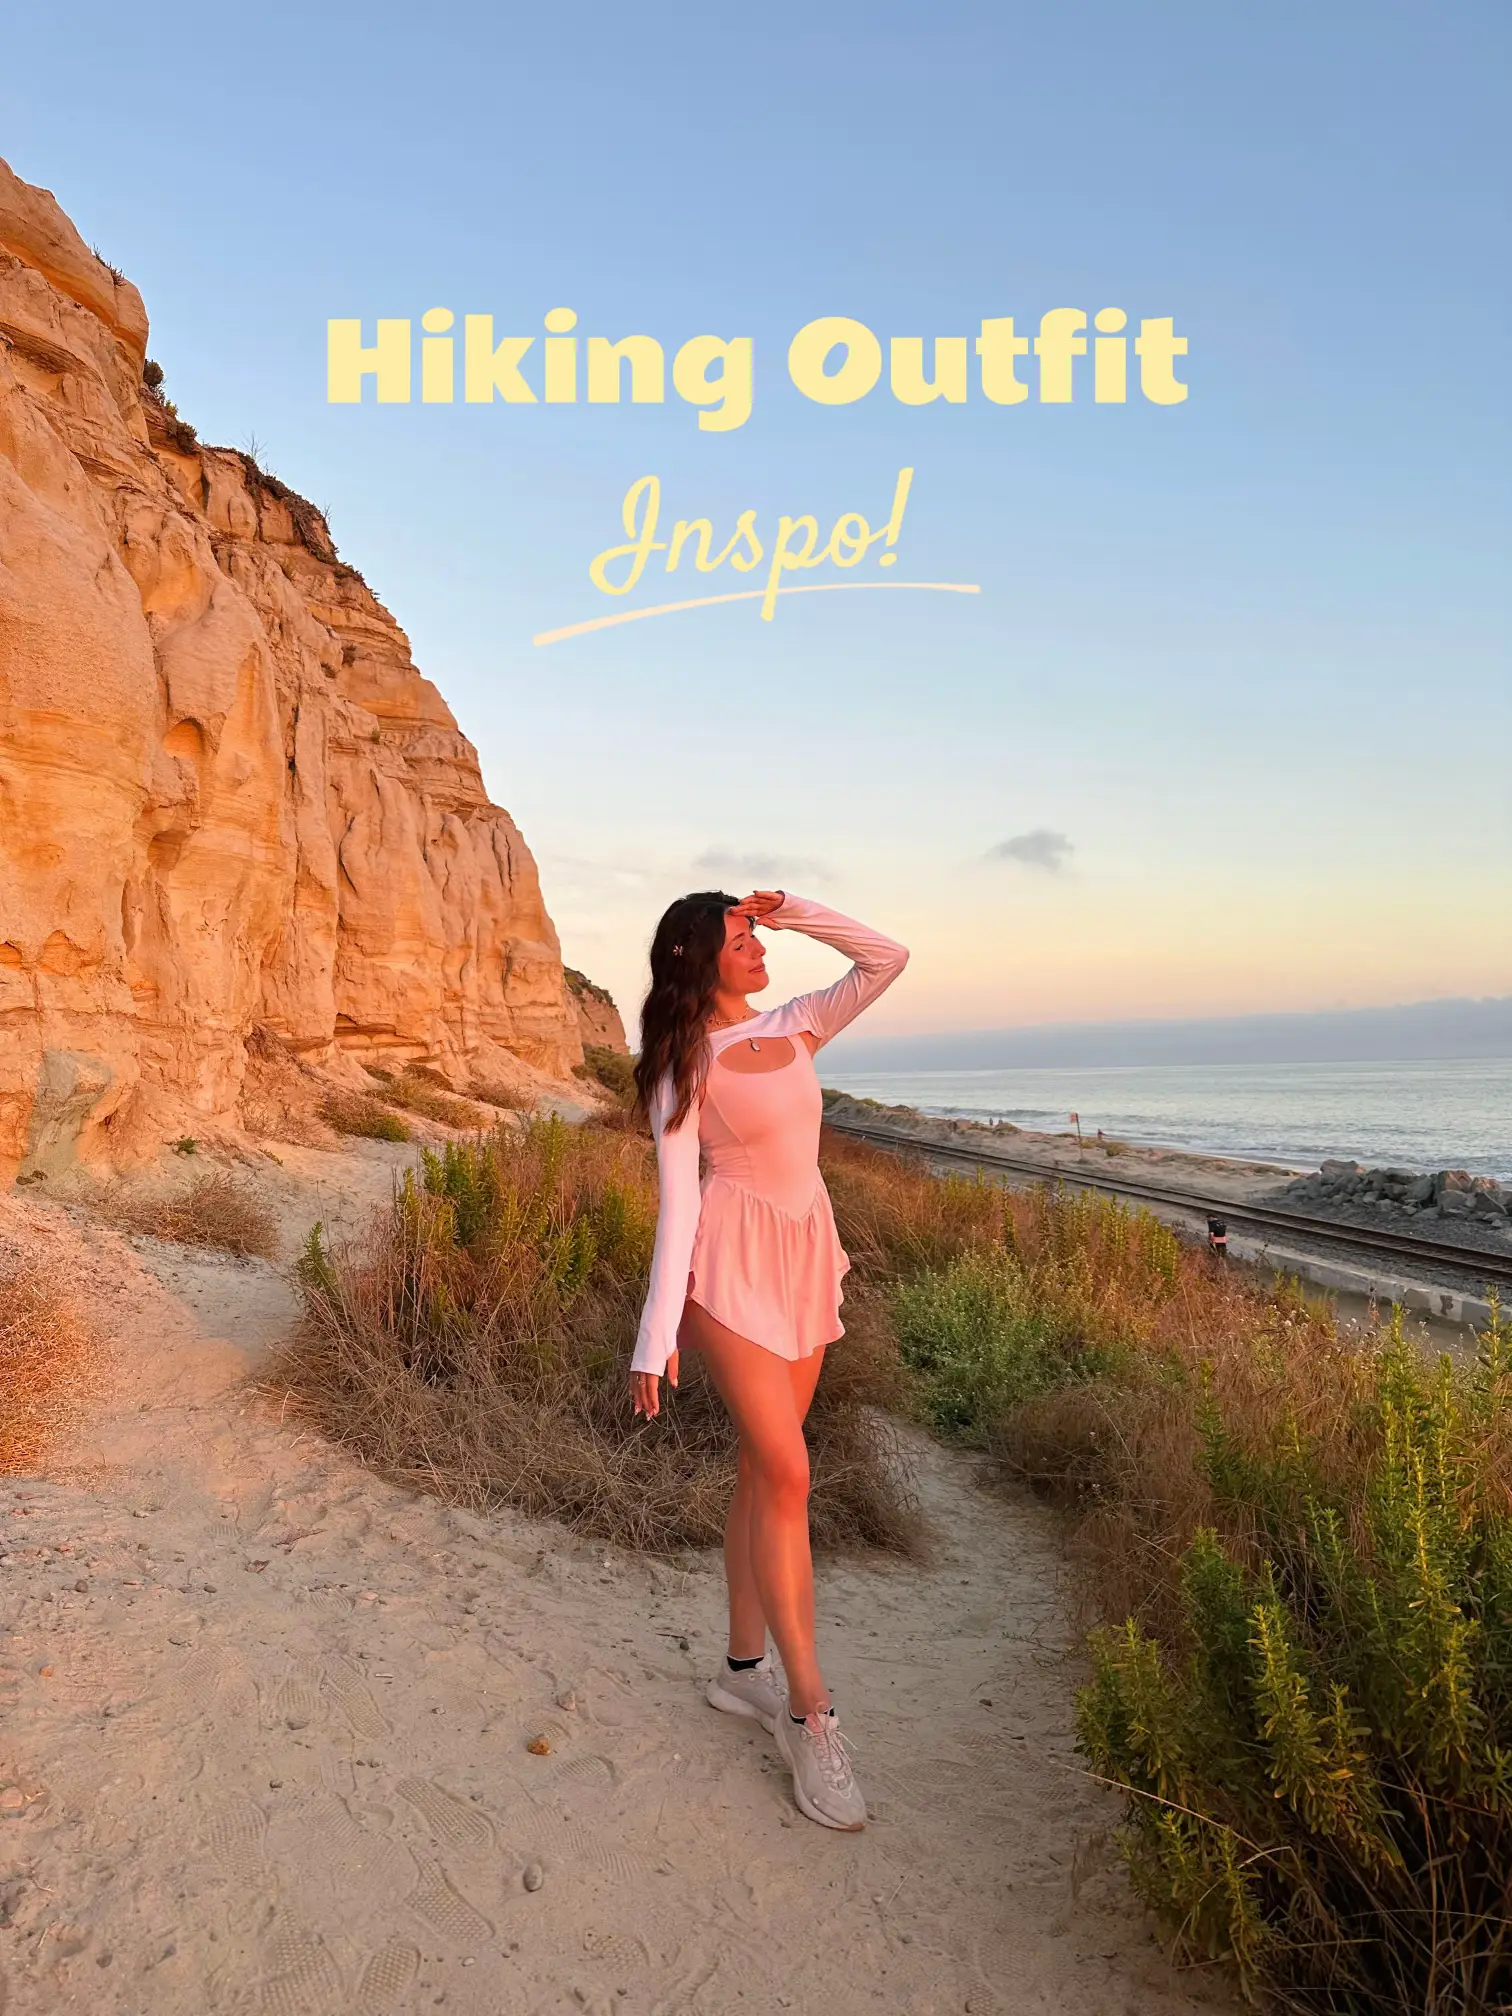 MY FAVORITE HIKING OUTFITS, Gallery posted by Val